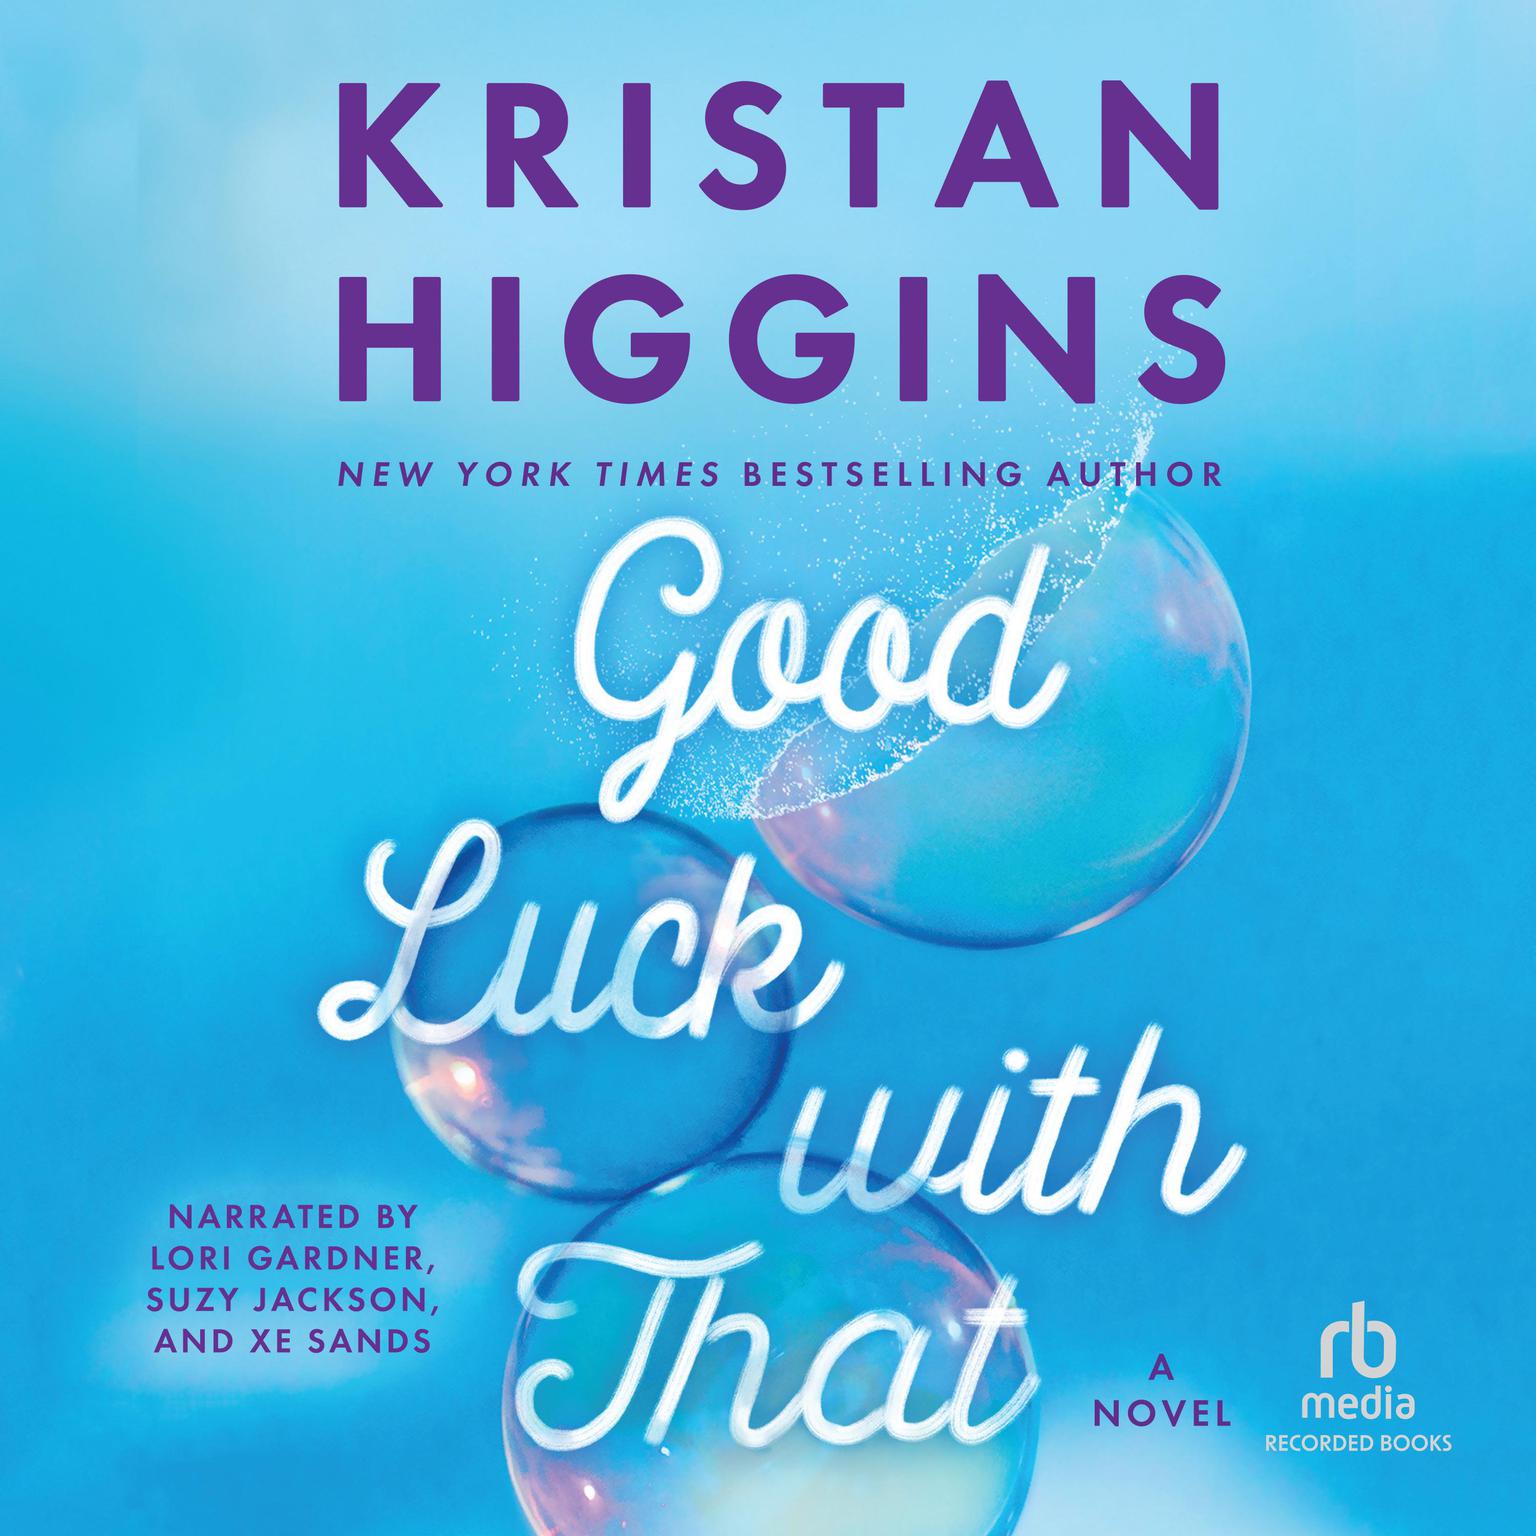 Good Luck with That Audiobook, by Kristan Higgins